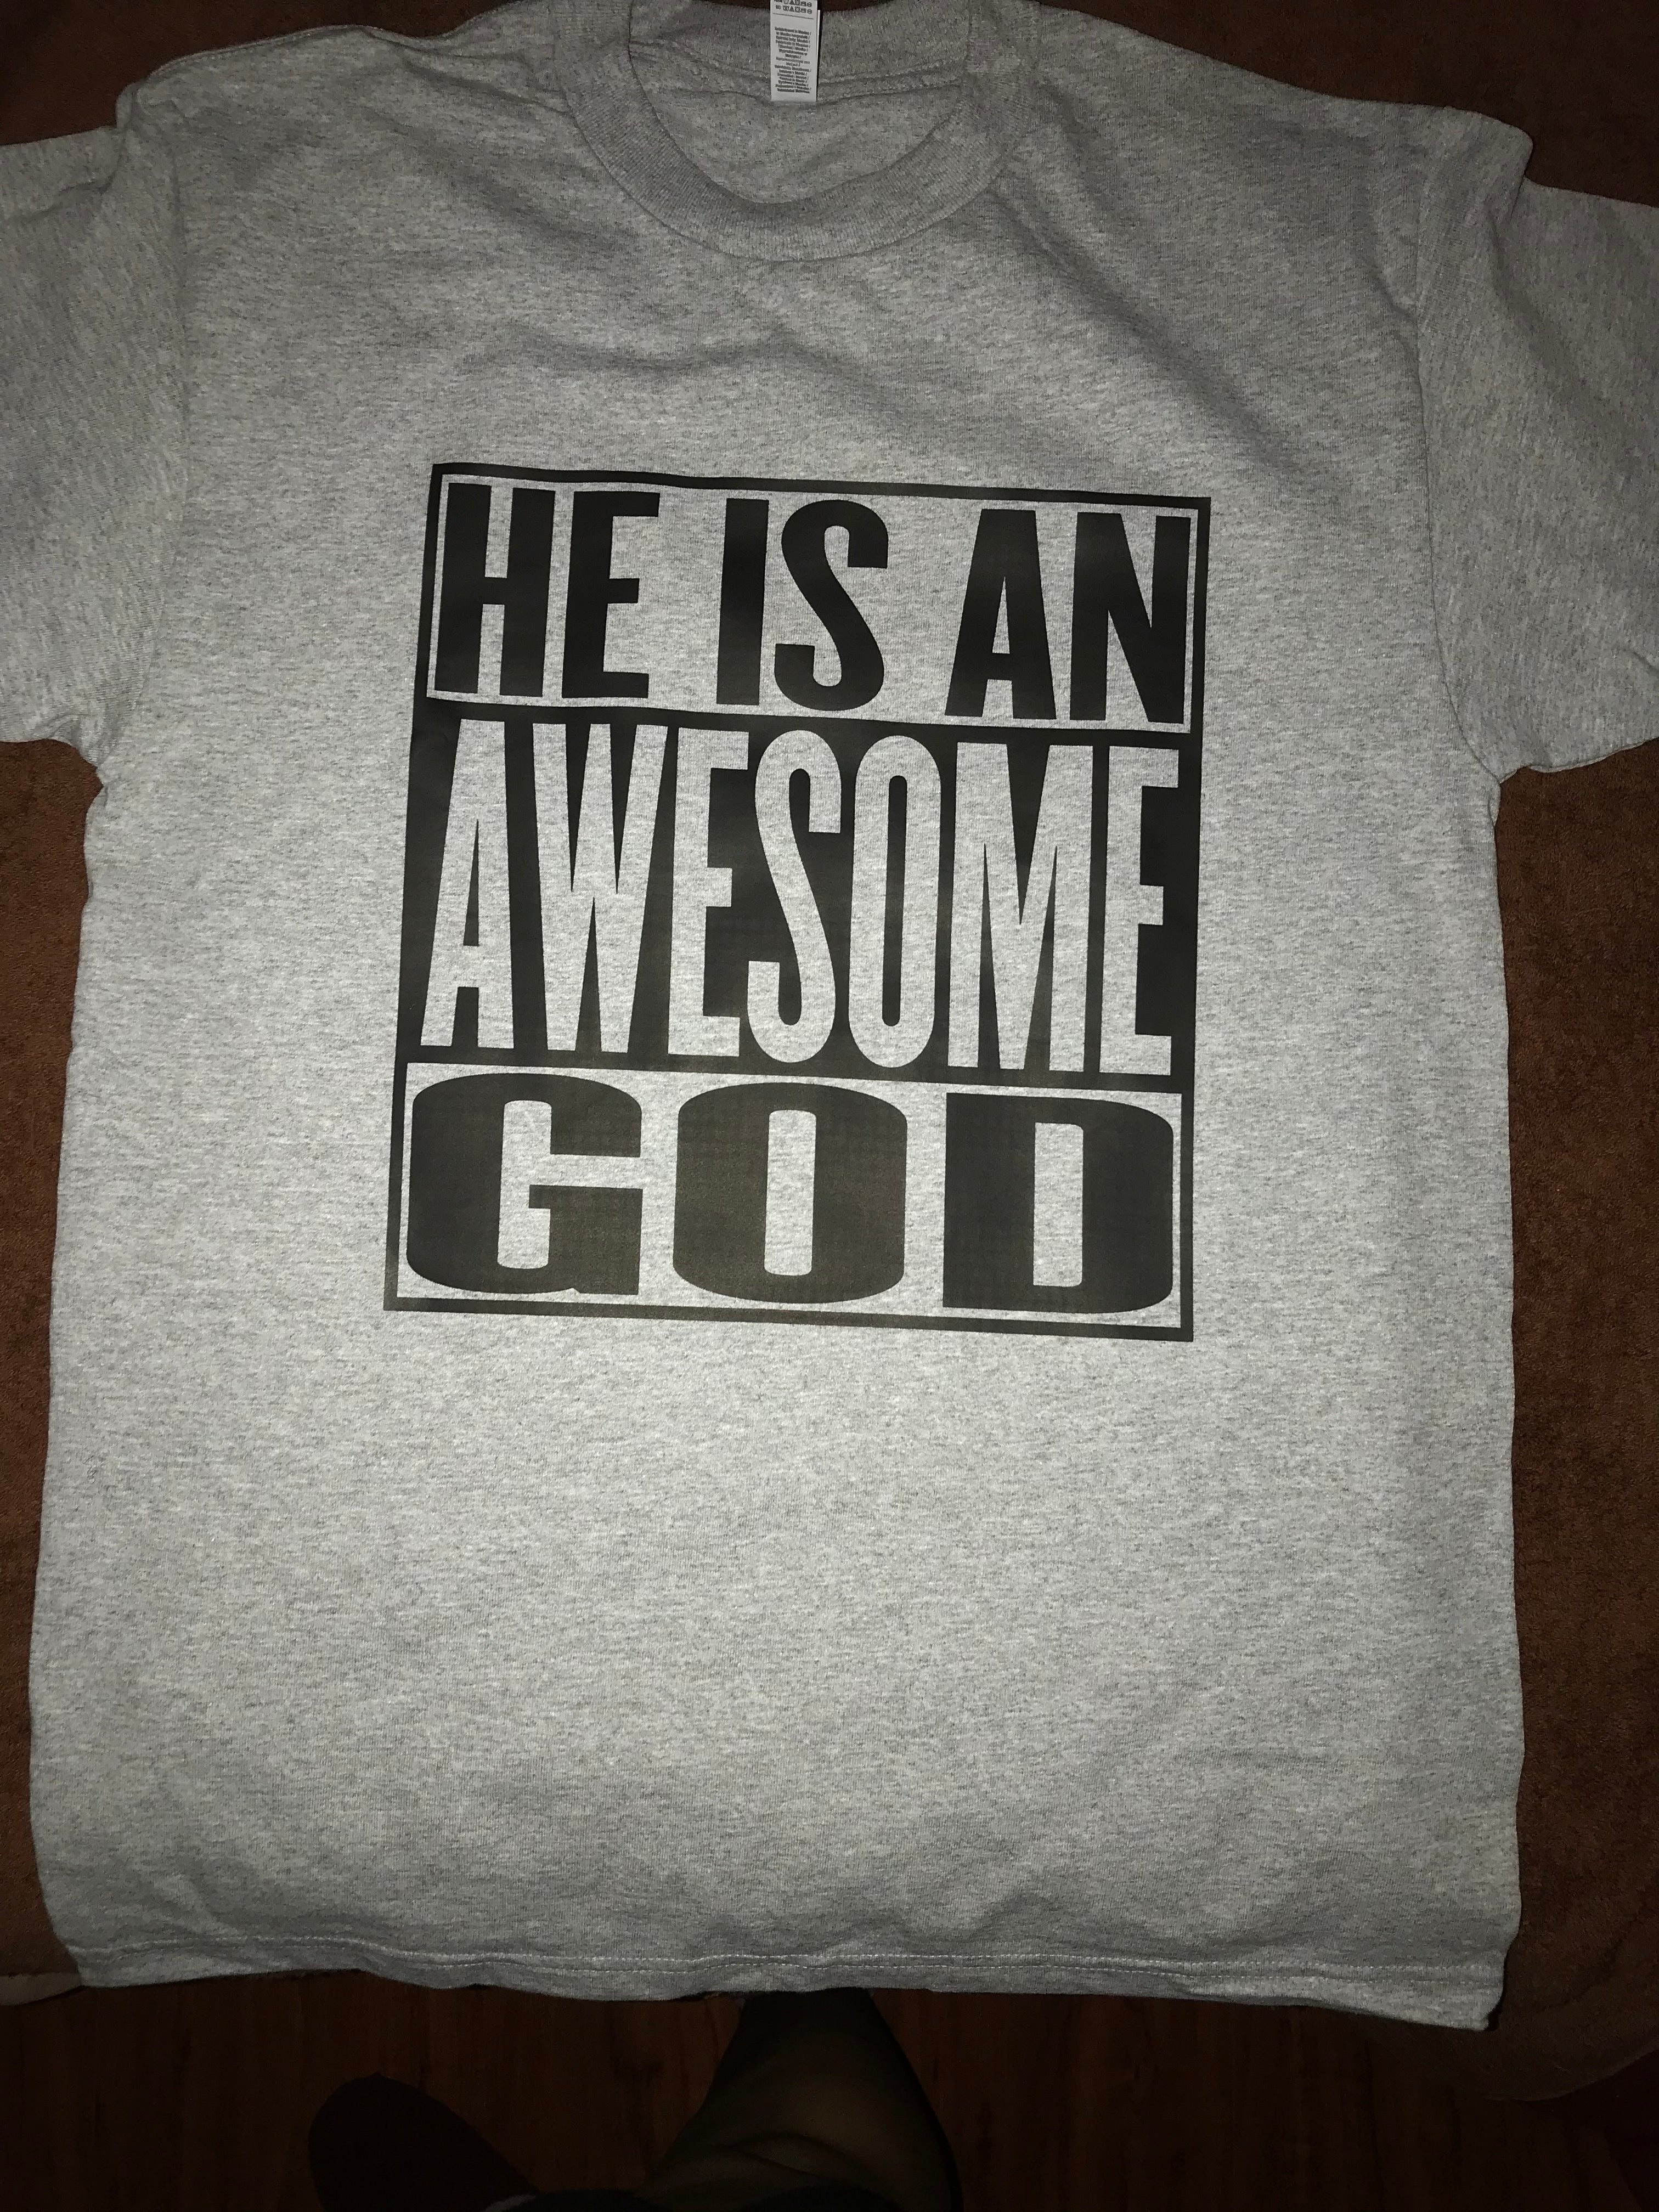 Shirt - "He Is An Awesome God"